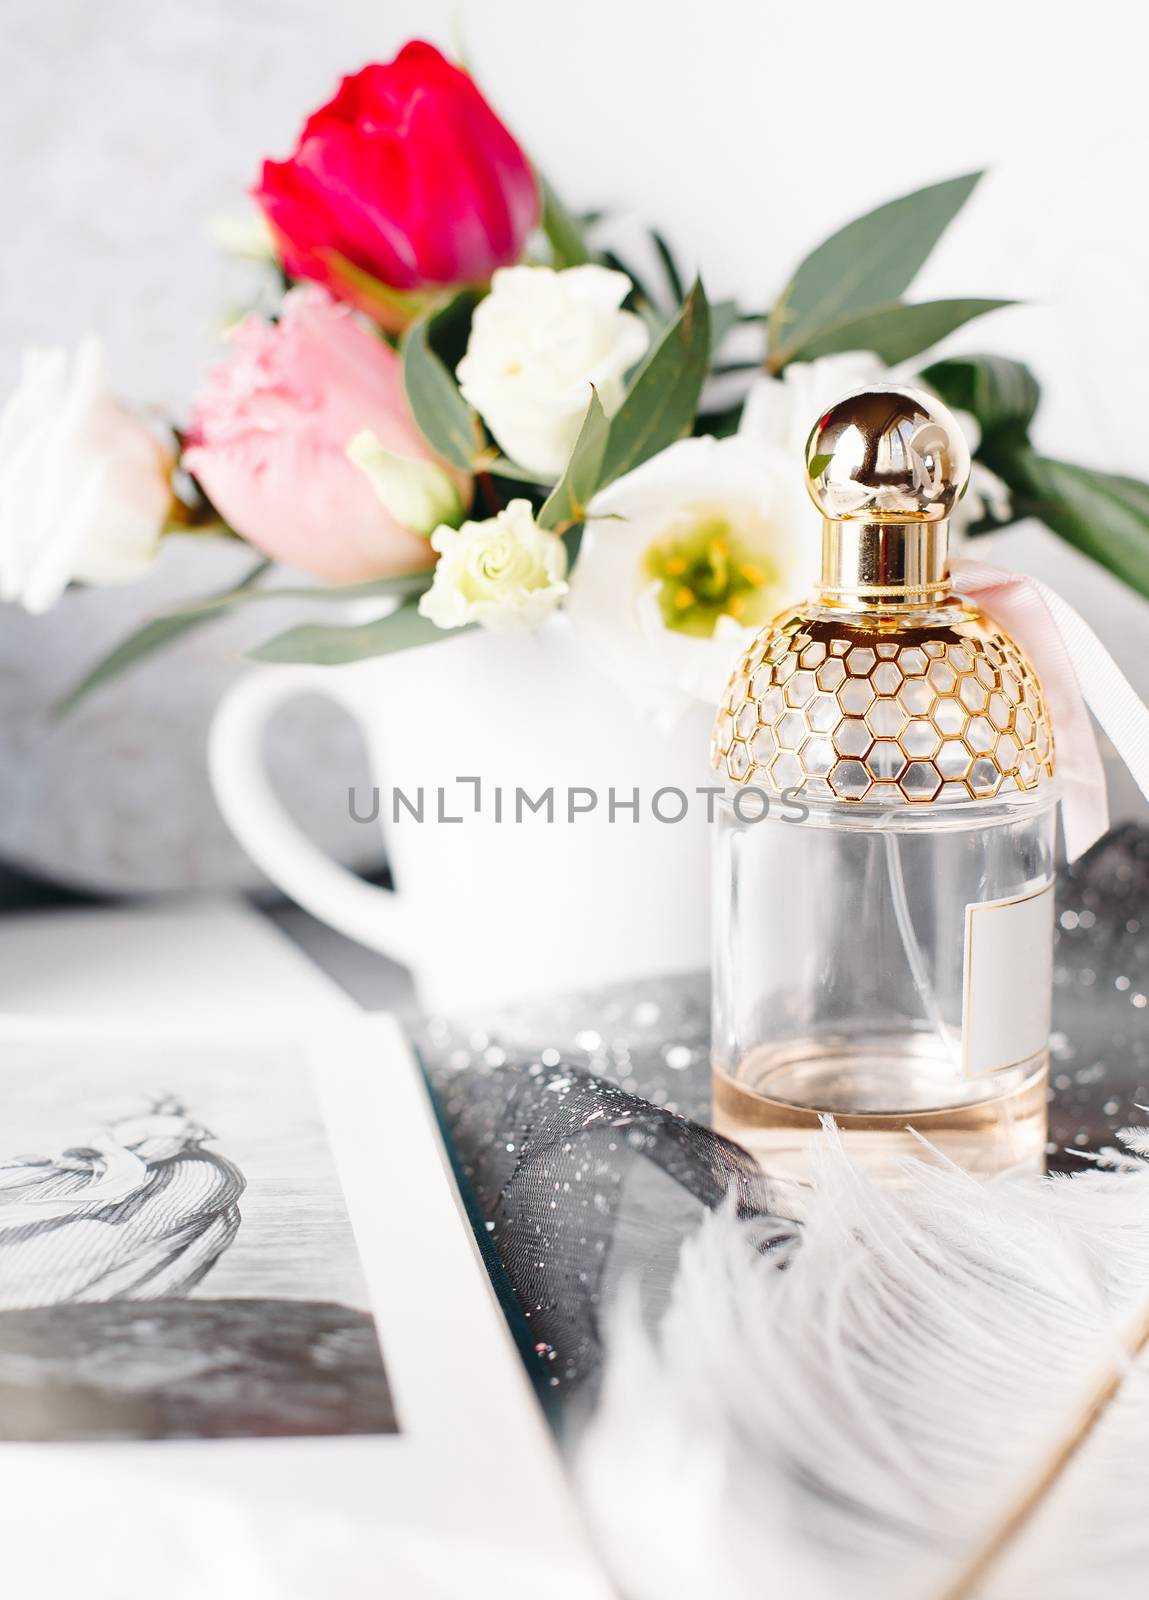 Bottle of perfume. Spring bouquet on gray concrete table. Roses, tulips and lisianthus. White feather